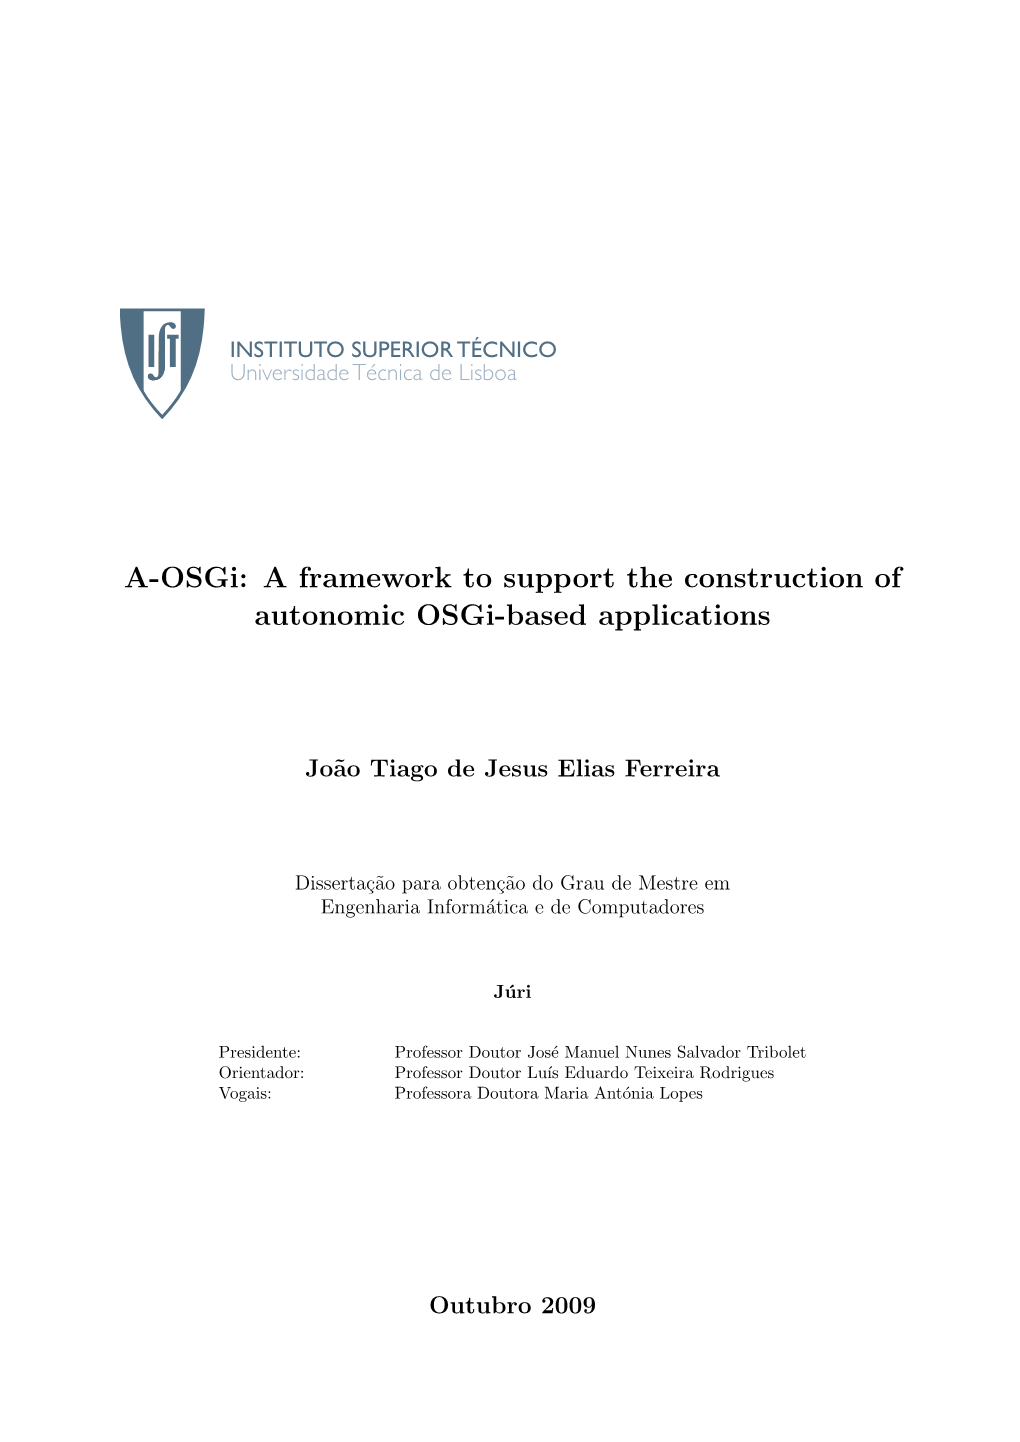 A Framework to Support the Construction of Autonomic Osgi-Based Applications